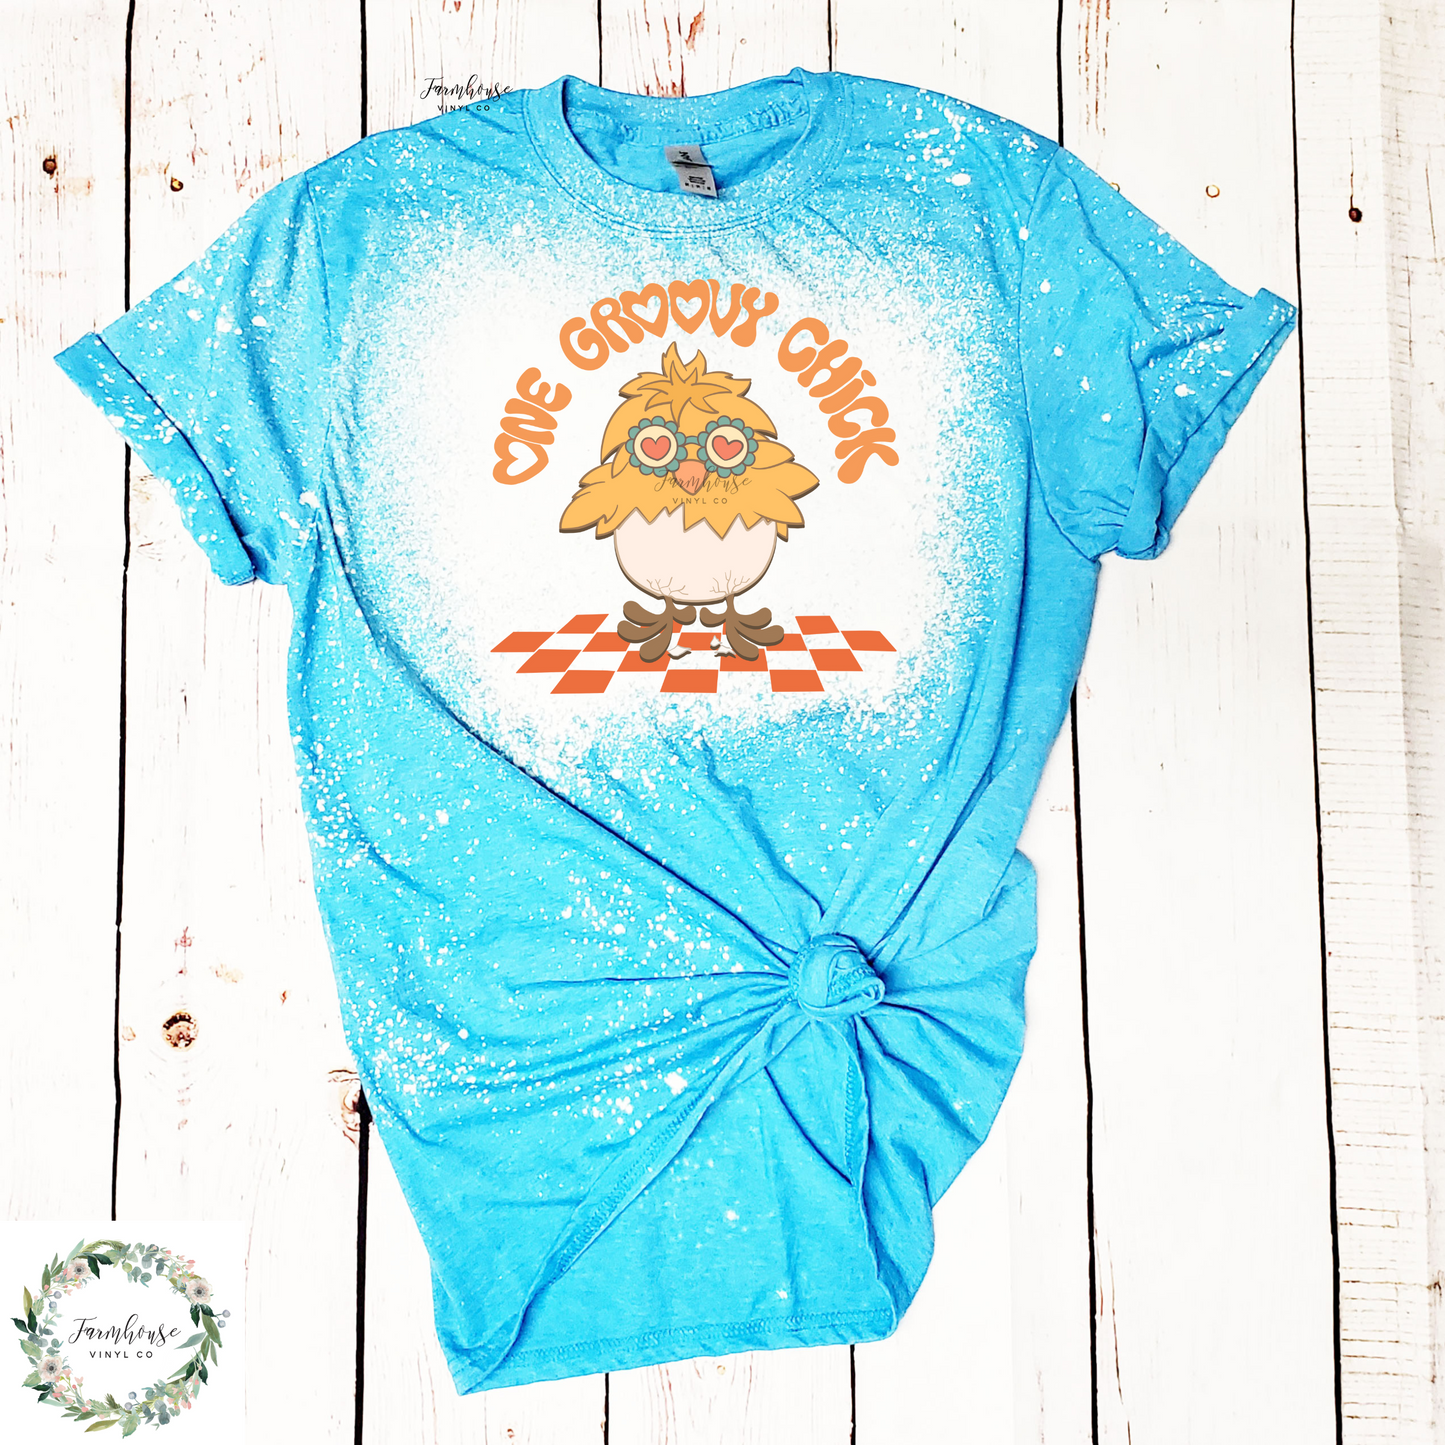 One Groovy Chick Bleached Shirt